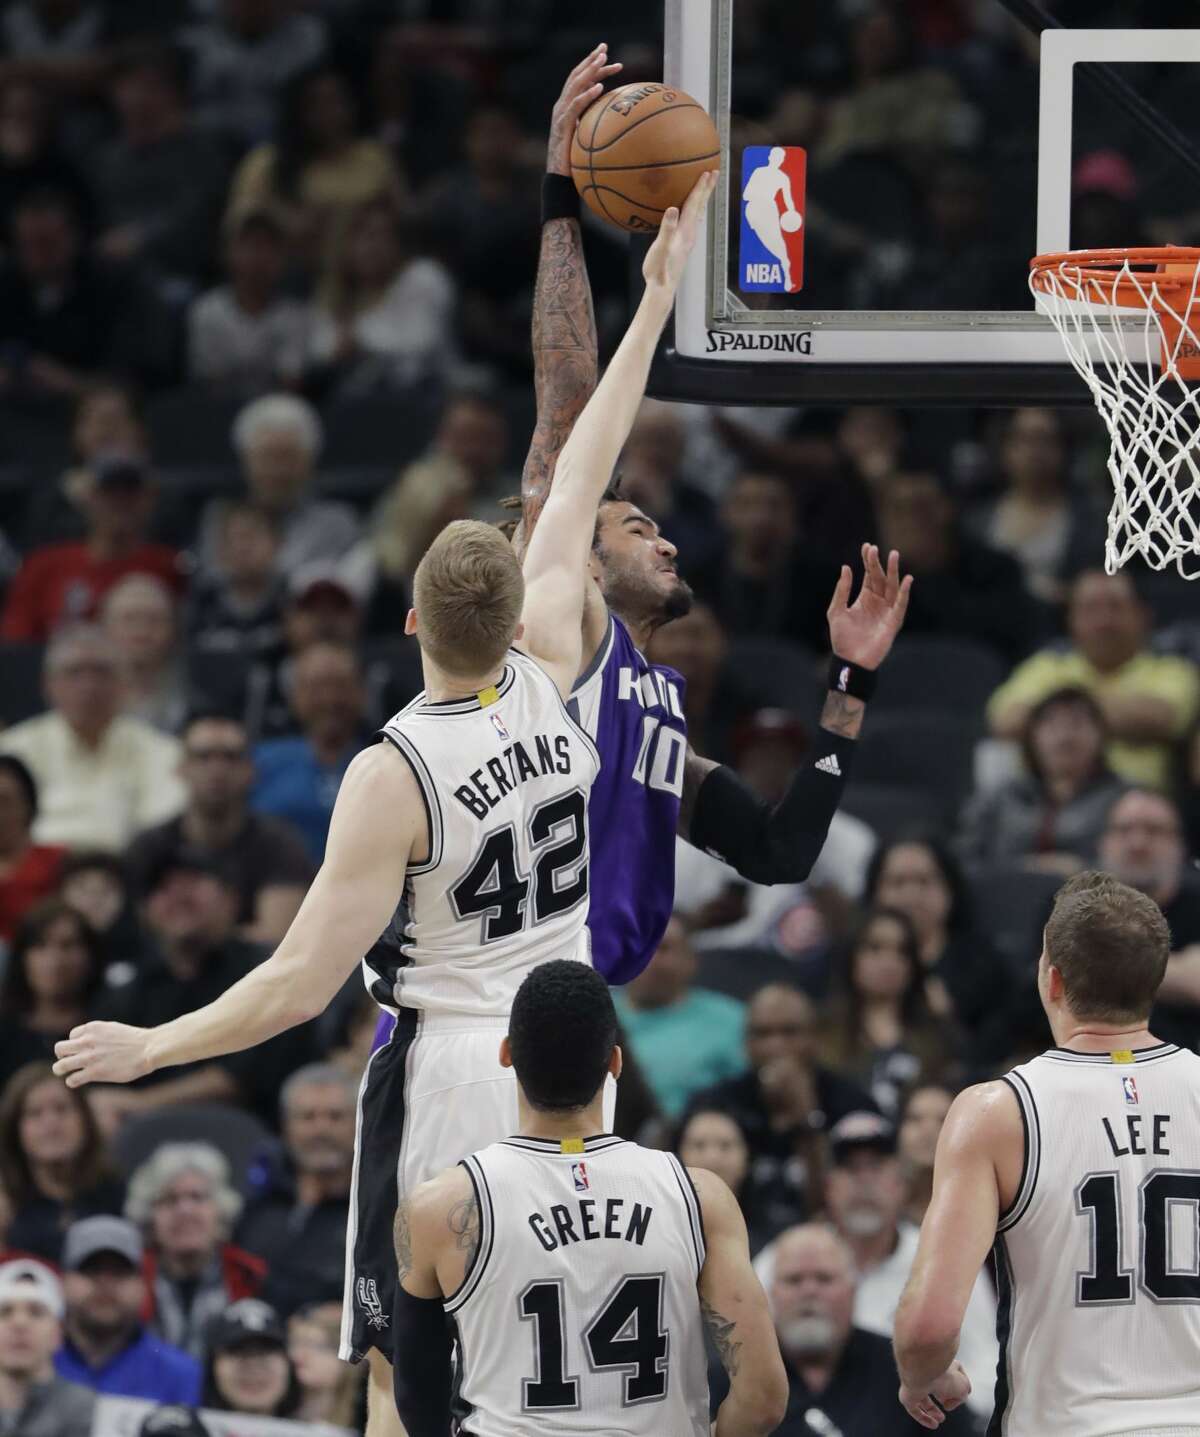 Sacramento Kings center Willie Cauley-Stein (00) is blocked by San Antonio Spurs forward Davis Bertans (42) as he tires to dunk the ball during the second half of an NBA basketball game, Wednesday, March 8, 2017, in San Antonio. San Antonio won 114-104. (AP Photo/Eric Gay)